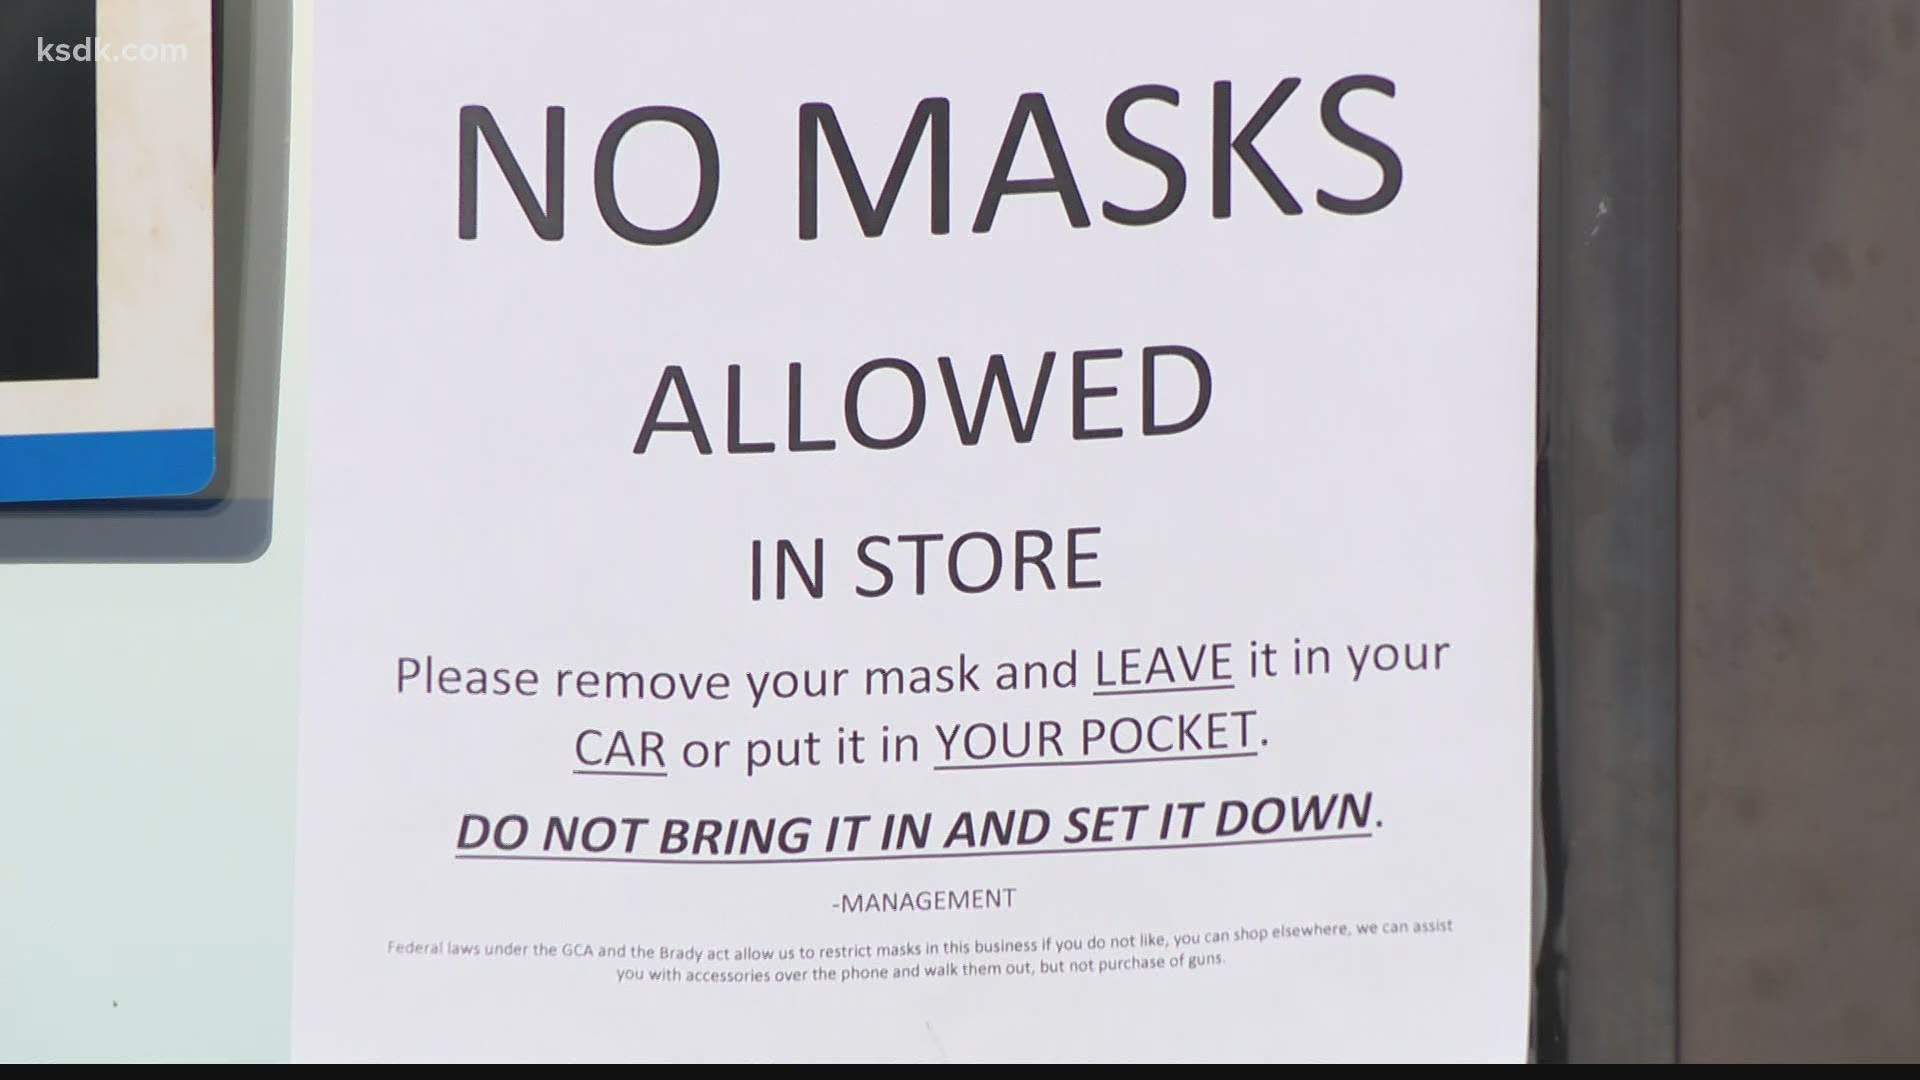 Ian McFarland continues to post a mask ban notice in the window of his gun shop, even as some grow concerned over rising COVID-19 case counts.